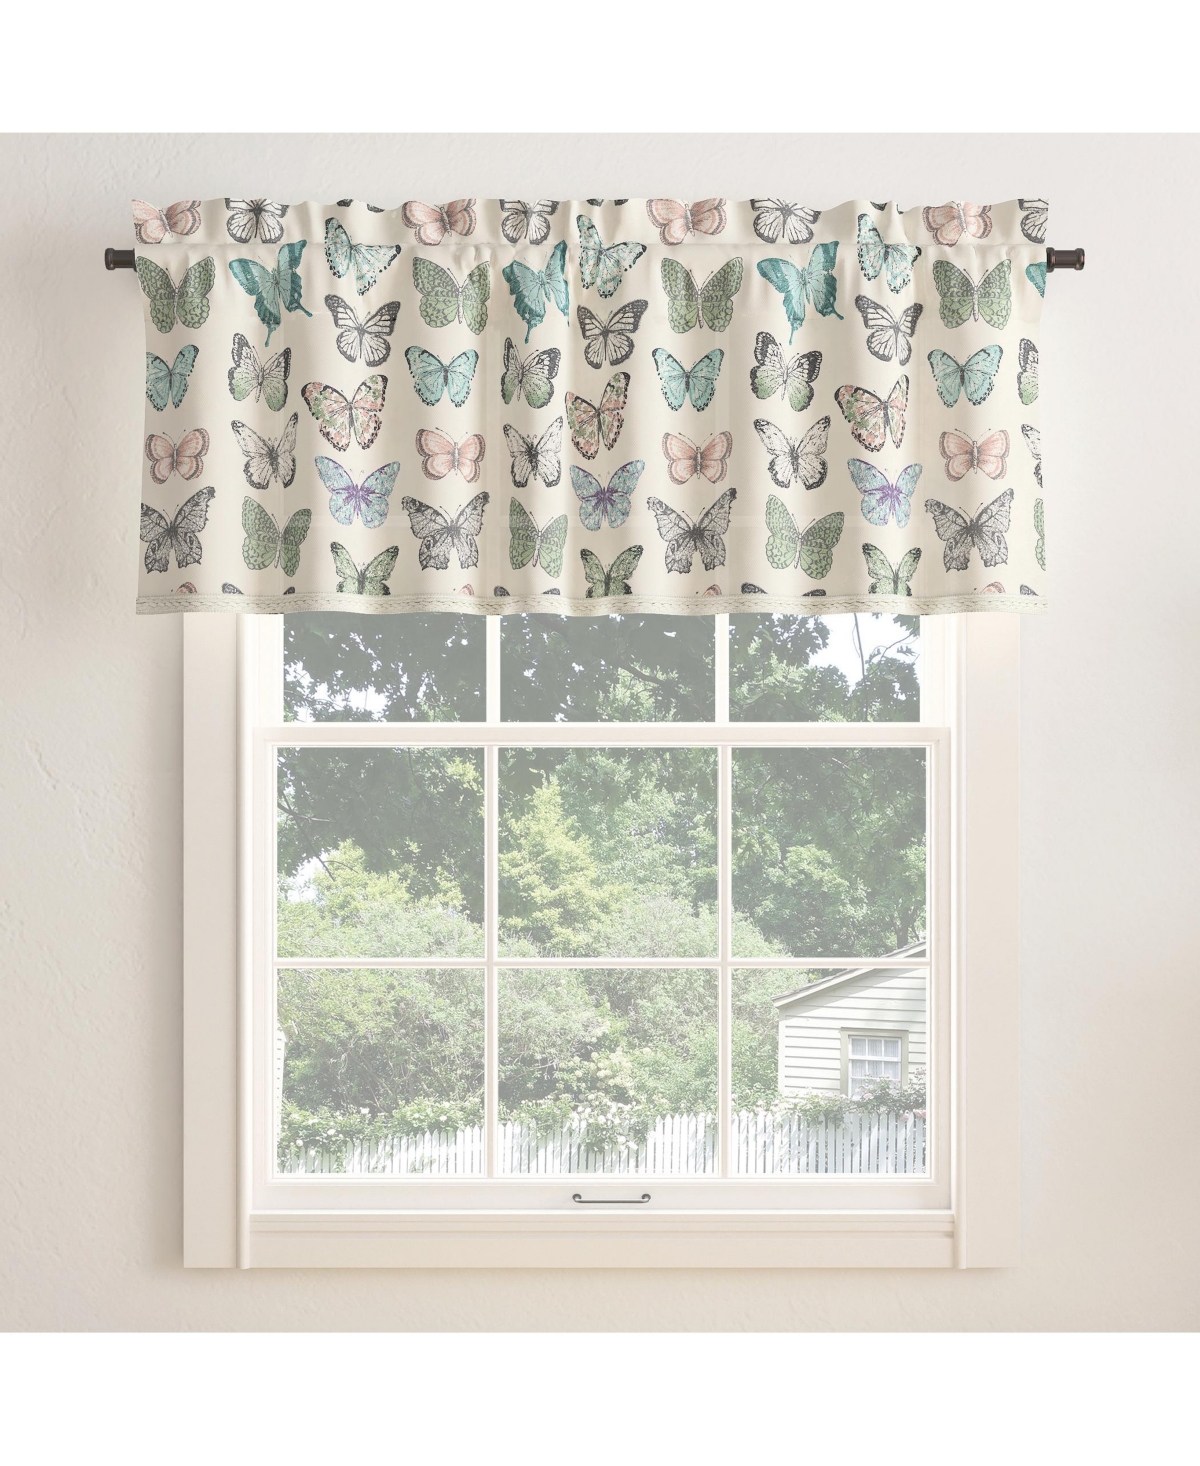 Marepesia Butterfly Print Embroidered Trim Semi-Sheer Rod Pocket Curtain Valance - Blue